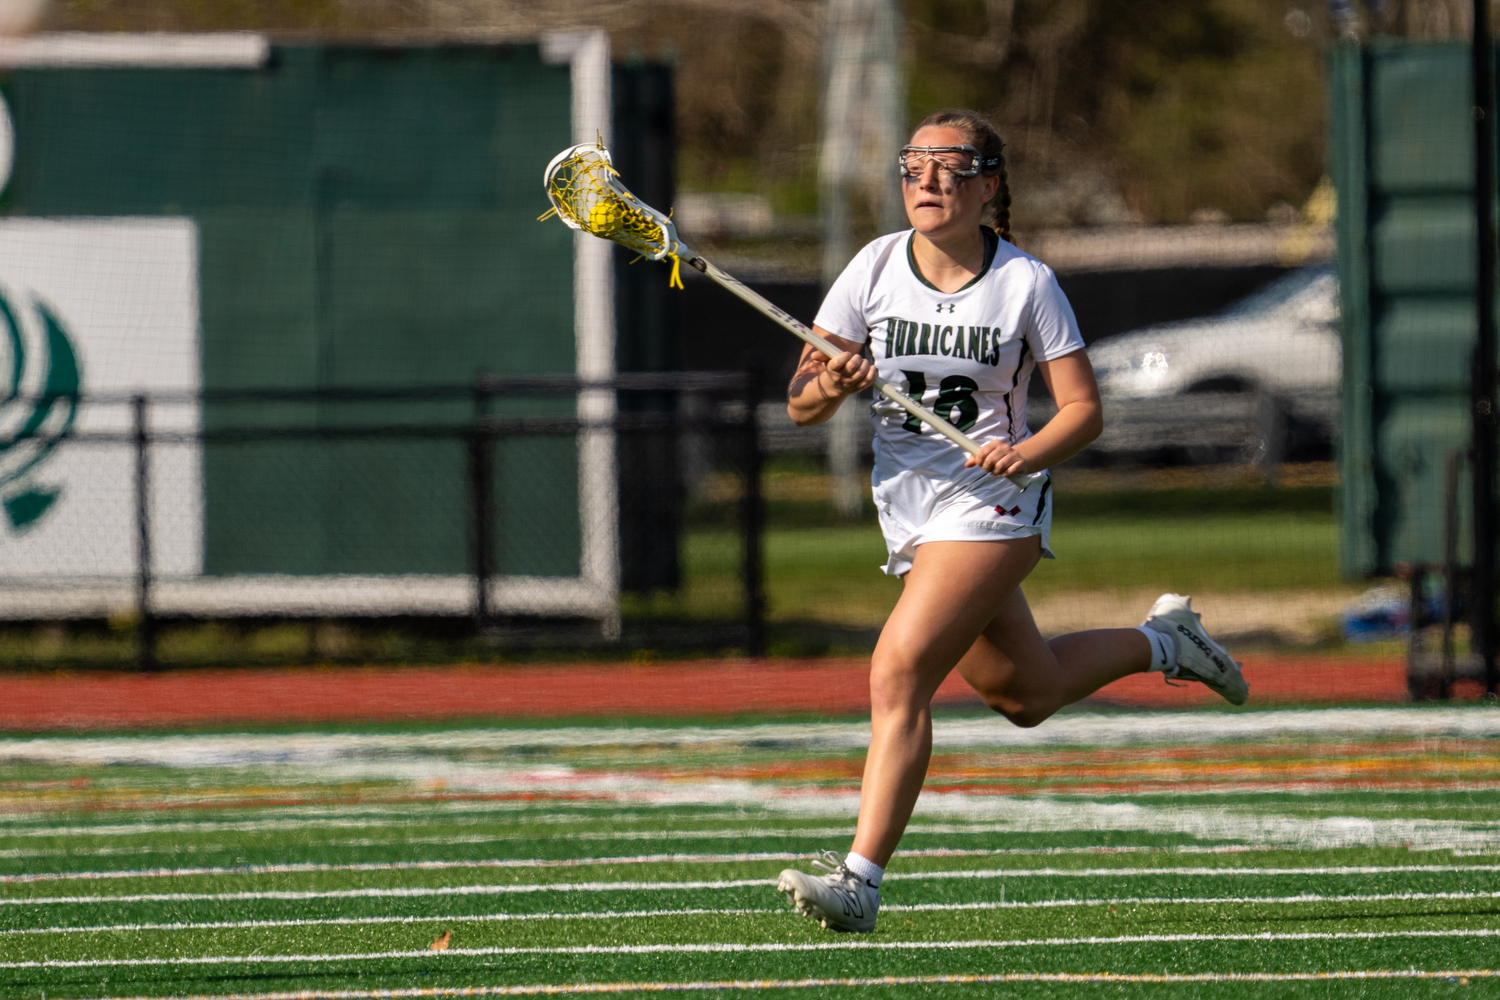 Senior defender Chloe Mosher during Westhampton Beach's 11-5 win over Miller Place April 24. RON ESPOSITO